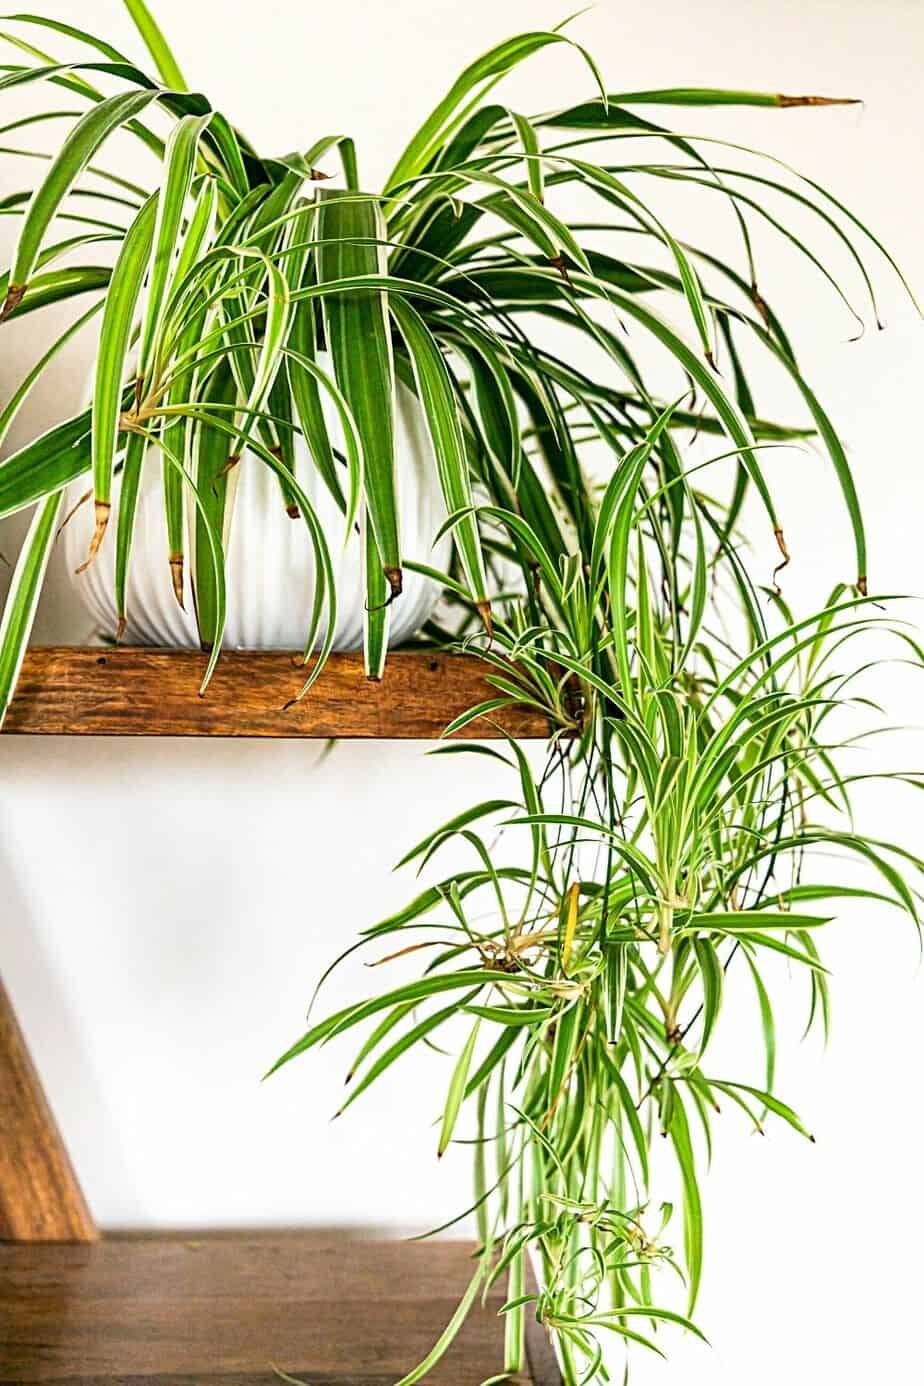 Spider Plant is one of the easiest hanging plants that you can grow indoors, preferably by a northwest-facing window